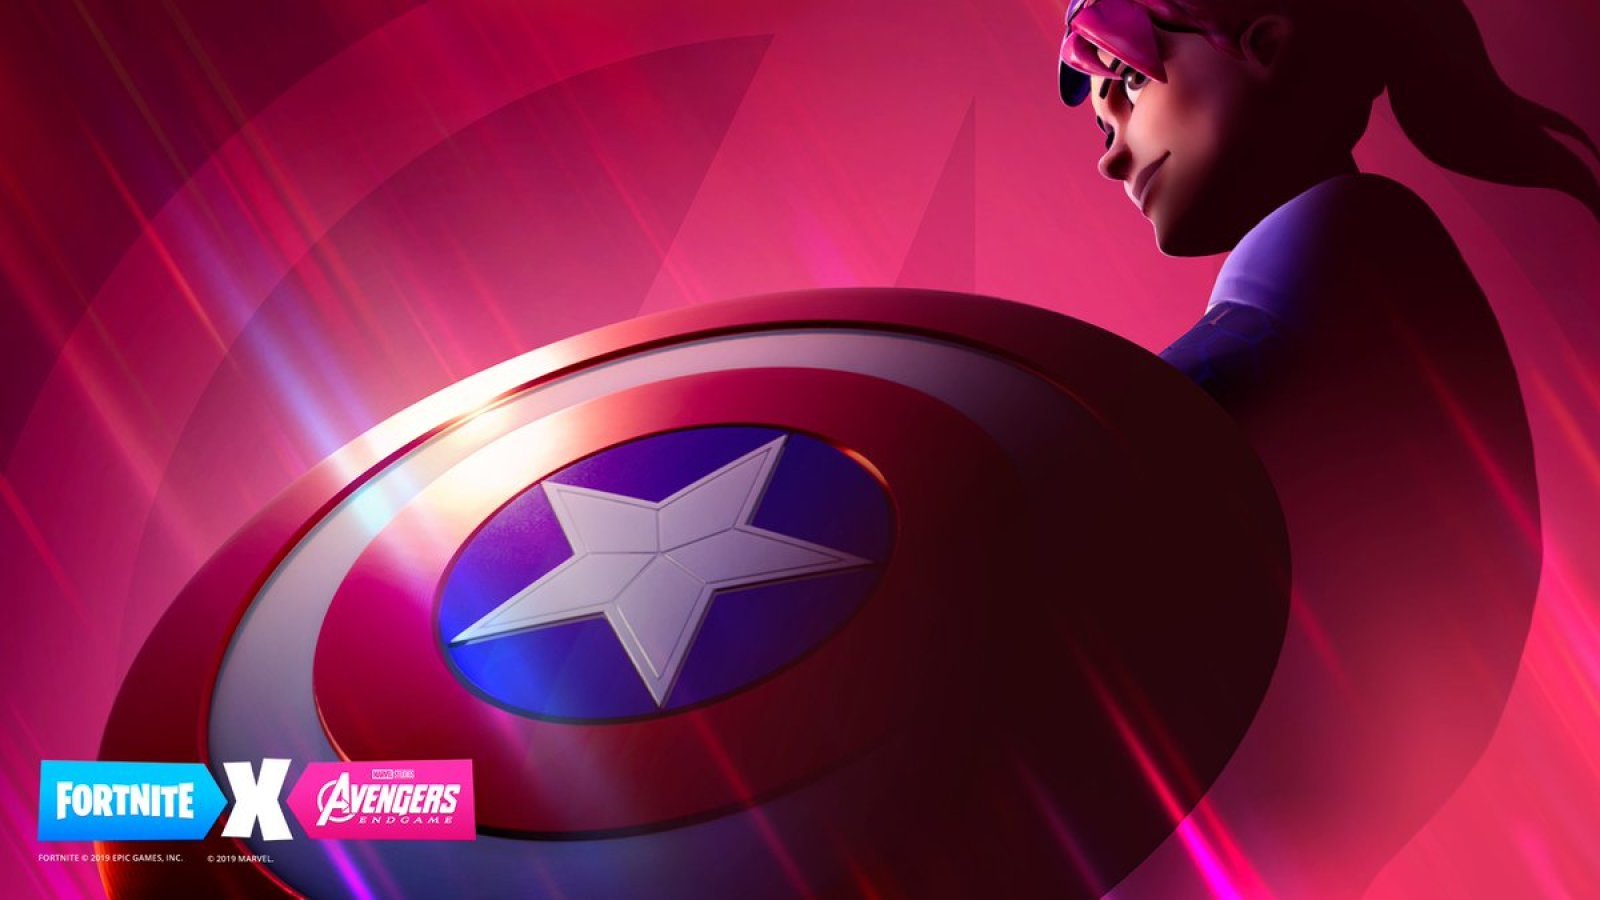 Avengers Endgame Event Is Ing To Fortnite This Week